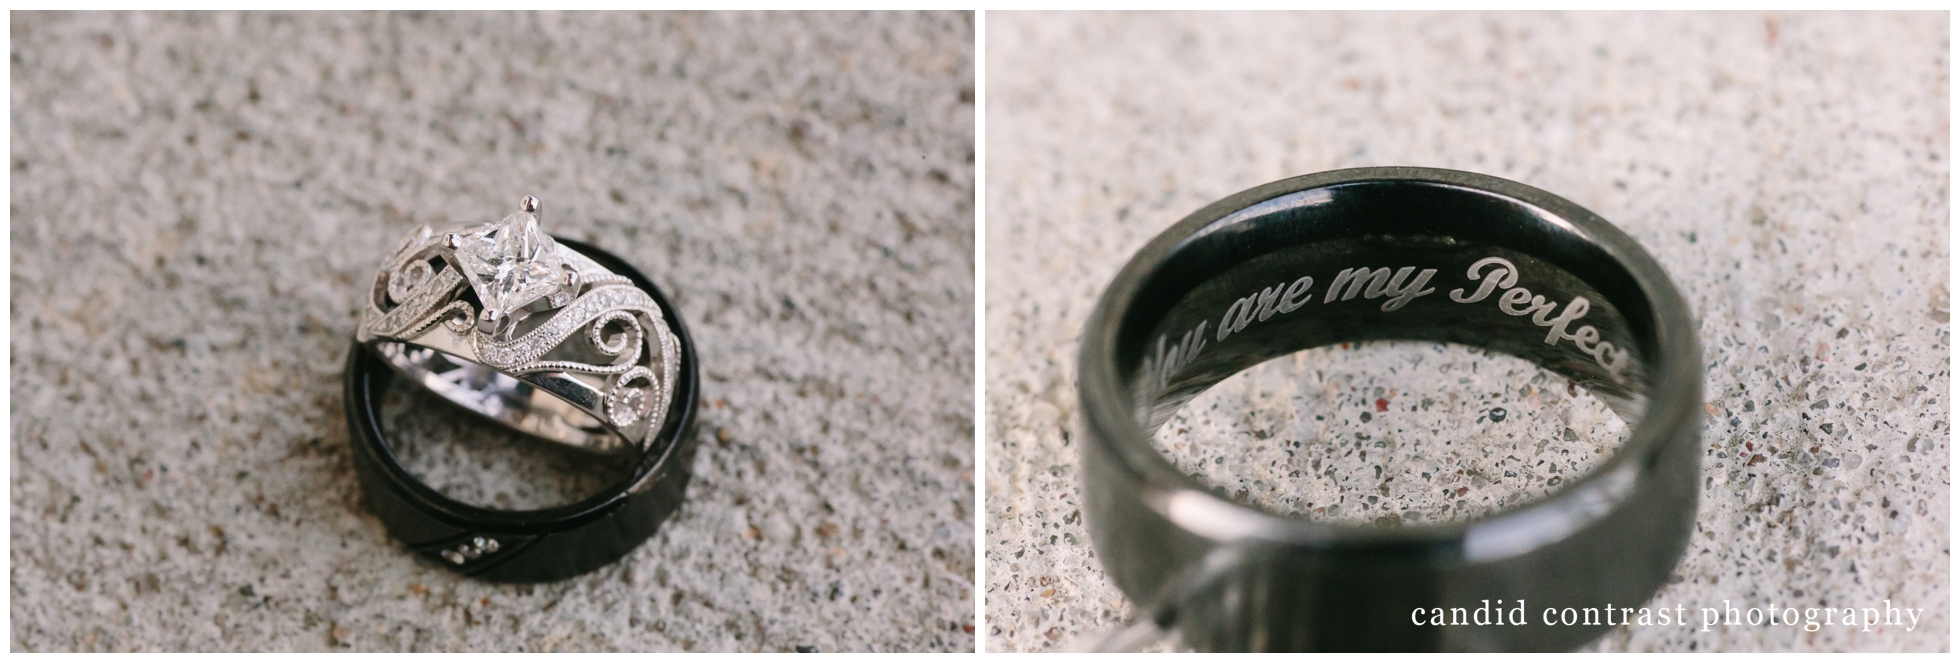 engraved wedding rings at a bellevue iowa outdoor wedding at the shore event center, iowa wedding photographer candid contrast photography